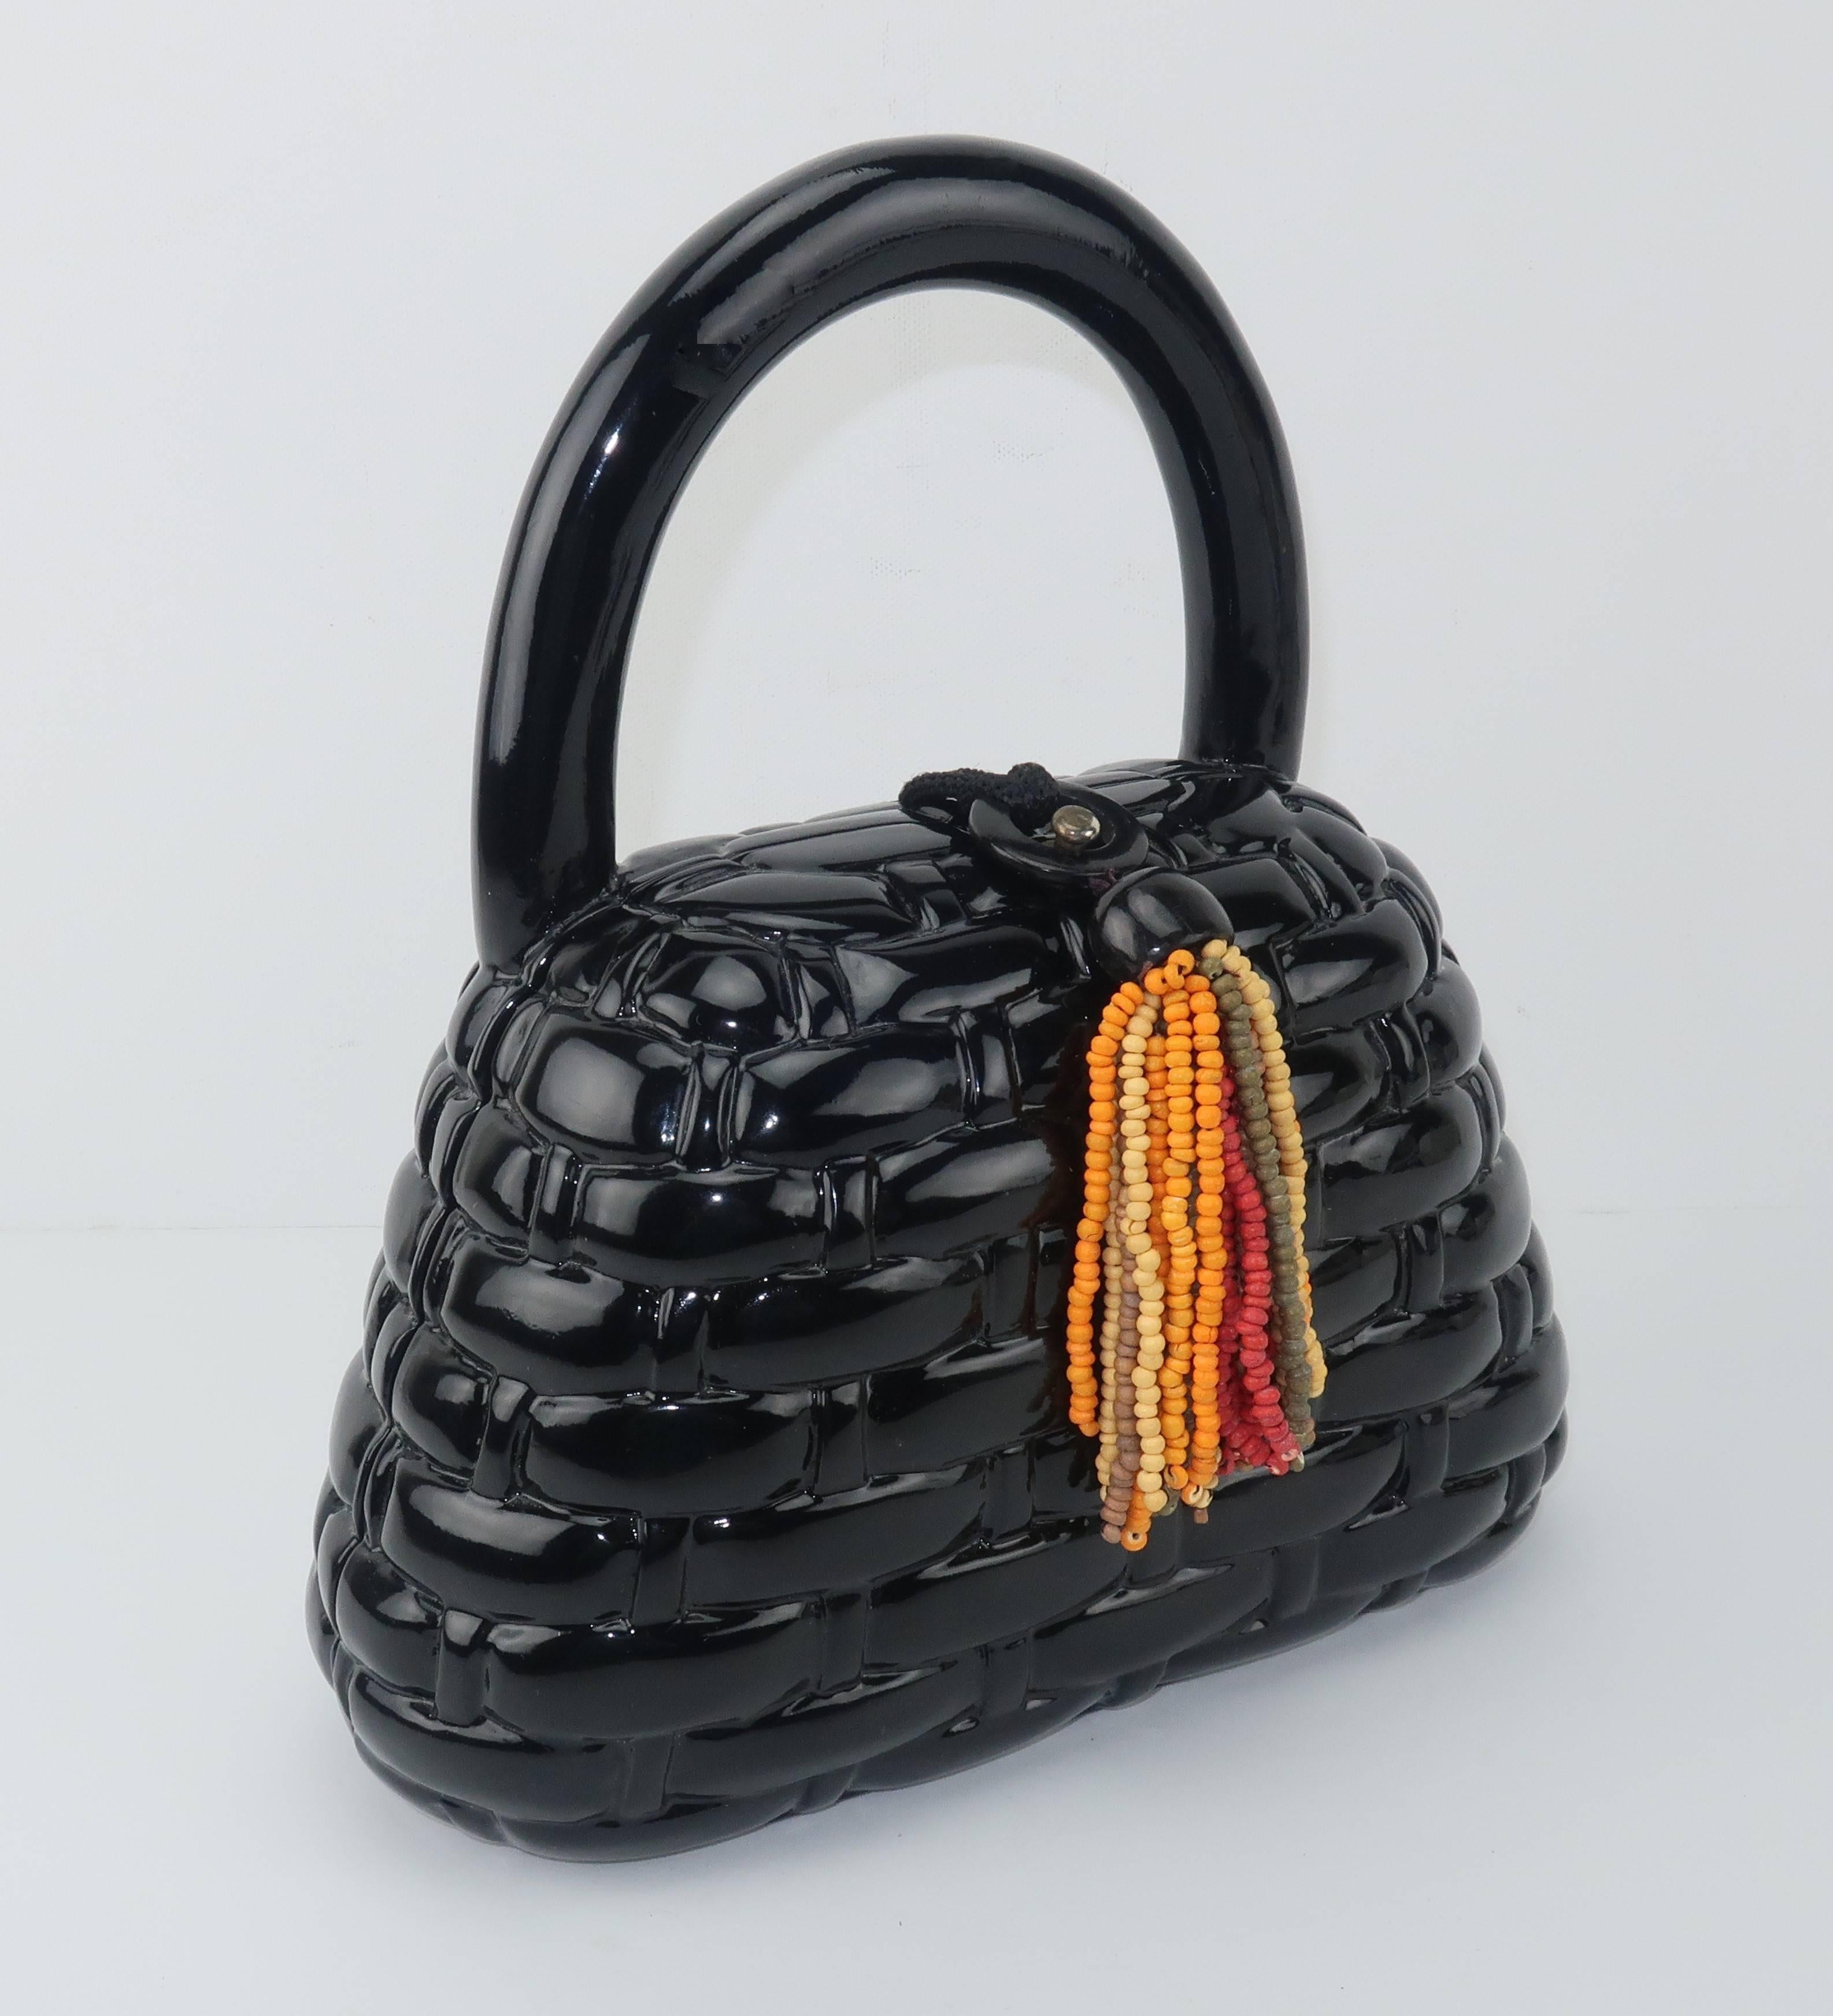 Witty ... whimsical ... wearable ... AND wooden!  This vintage Timmy Woods of Beverly Hills black lacquered wooden handbag is fabricated to look like a basket bag with the appearance of a lattice woven surface.  The colorful beaded tassel closure